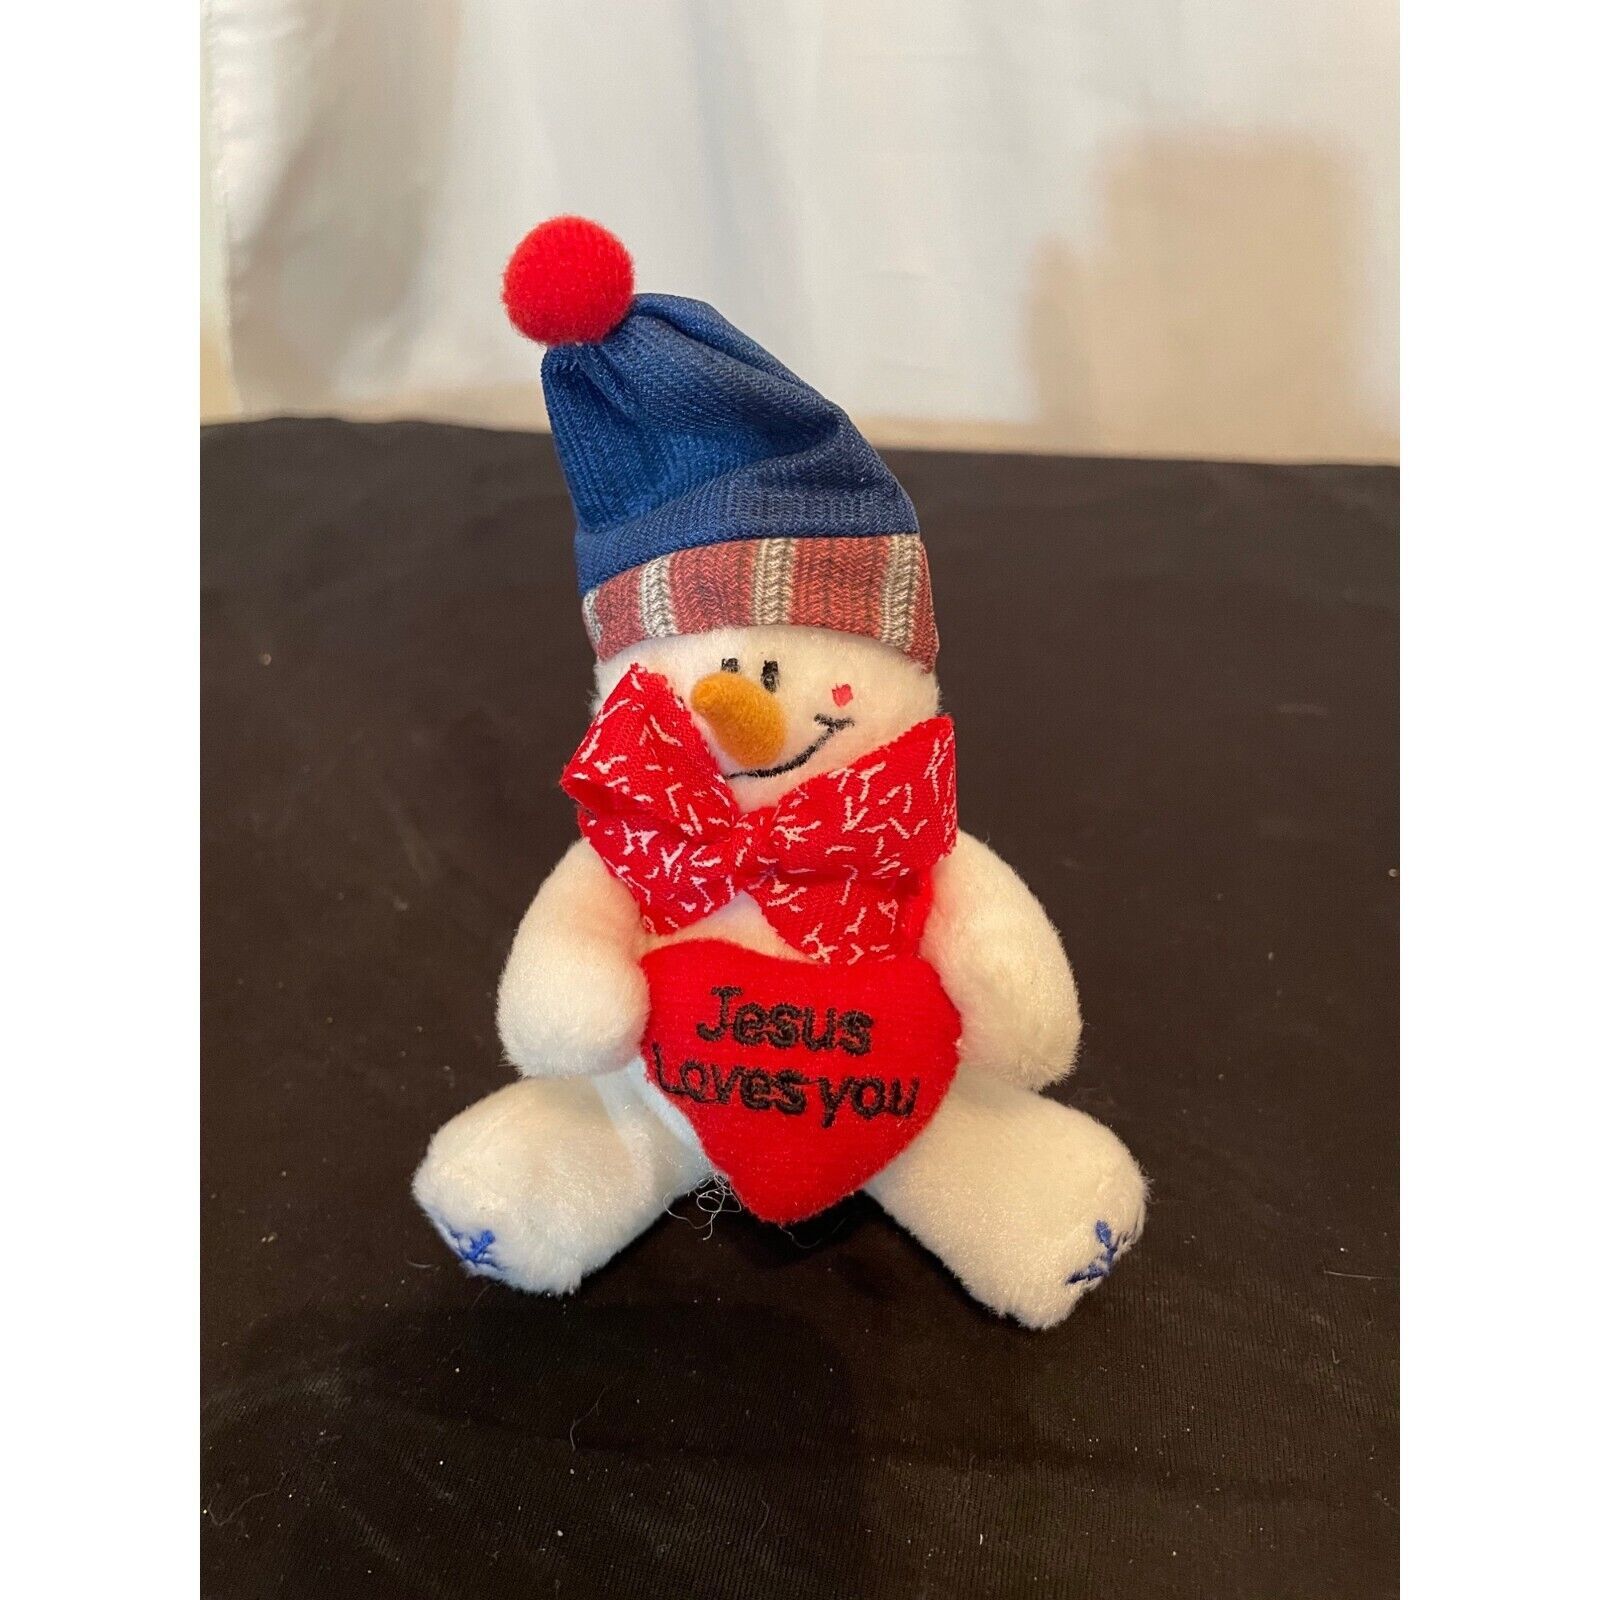 Christmas Holiday Snowman Plush 5.5 Inch Small with Jesus Loves You Heart - $7.84